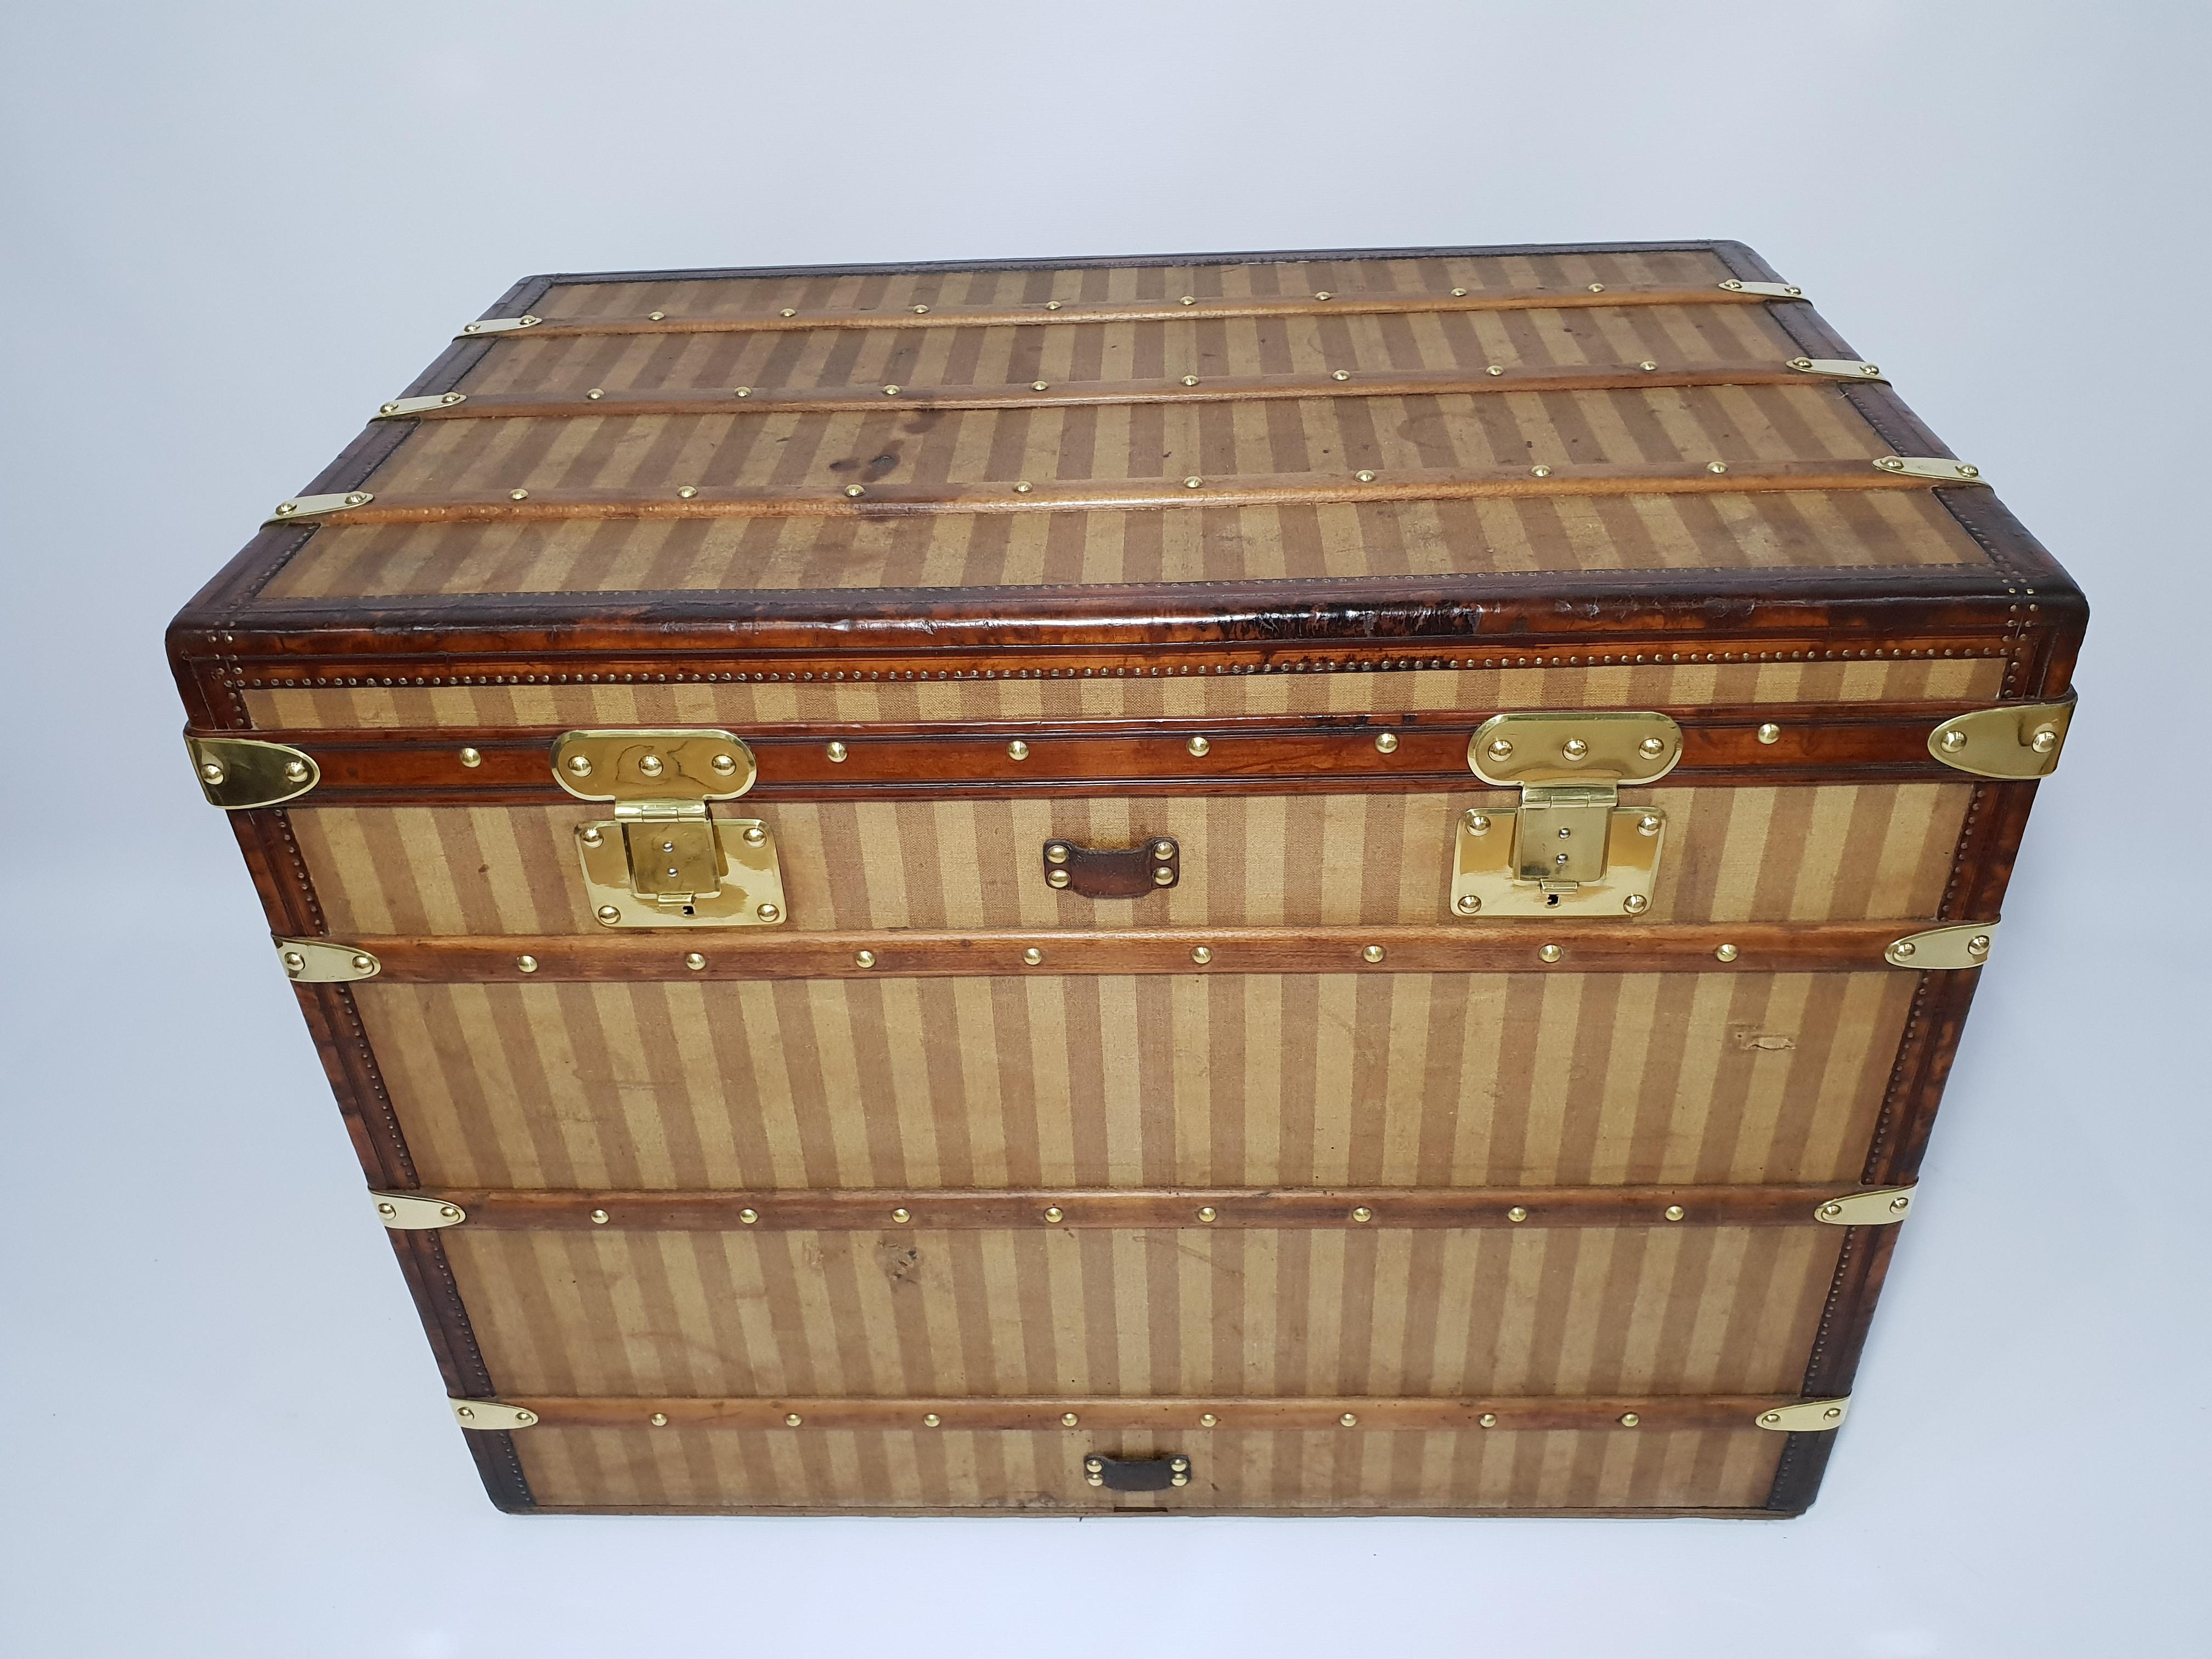 For sale a very rare haut courier Louis Vuitton trunk finished in striped or rayee canvas with leather bounding and brass hardware, very rare purple 100% genuine interior with tricolored French flag ribbon and all interior trays.

An amazing piece